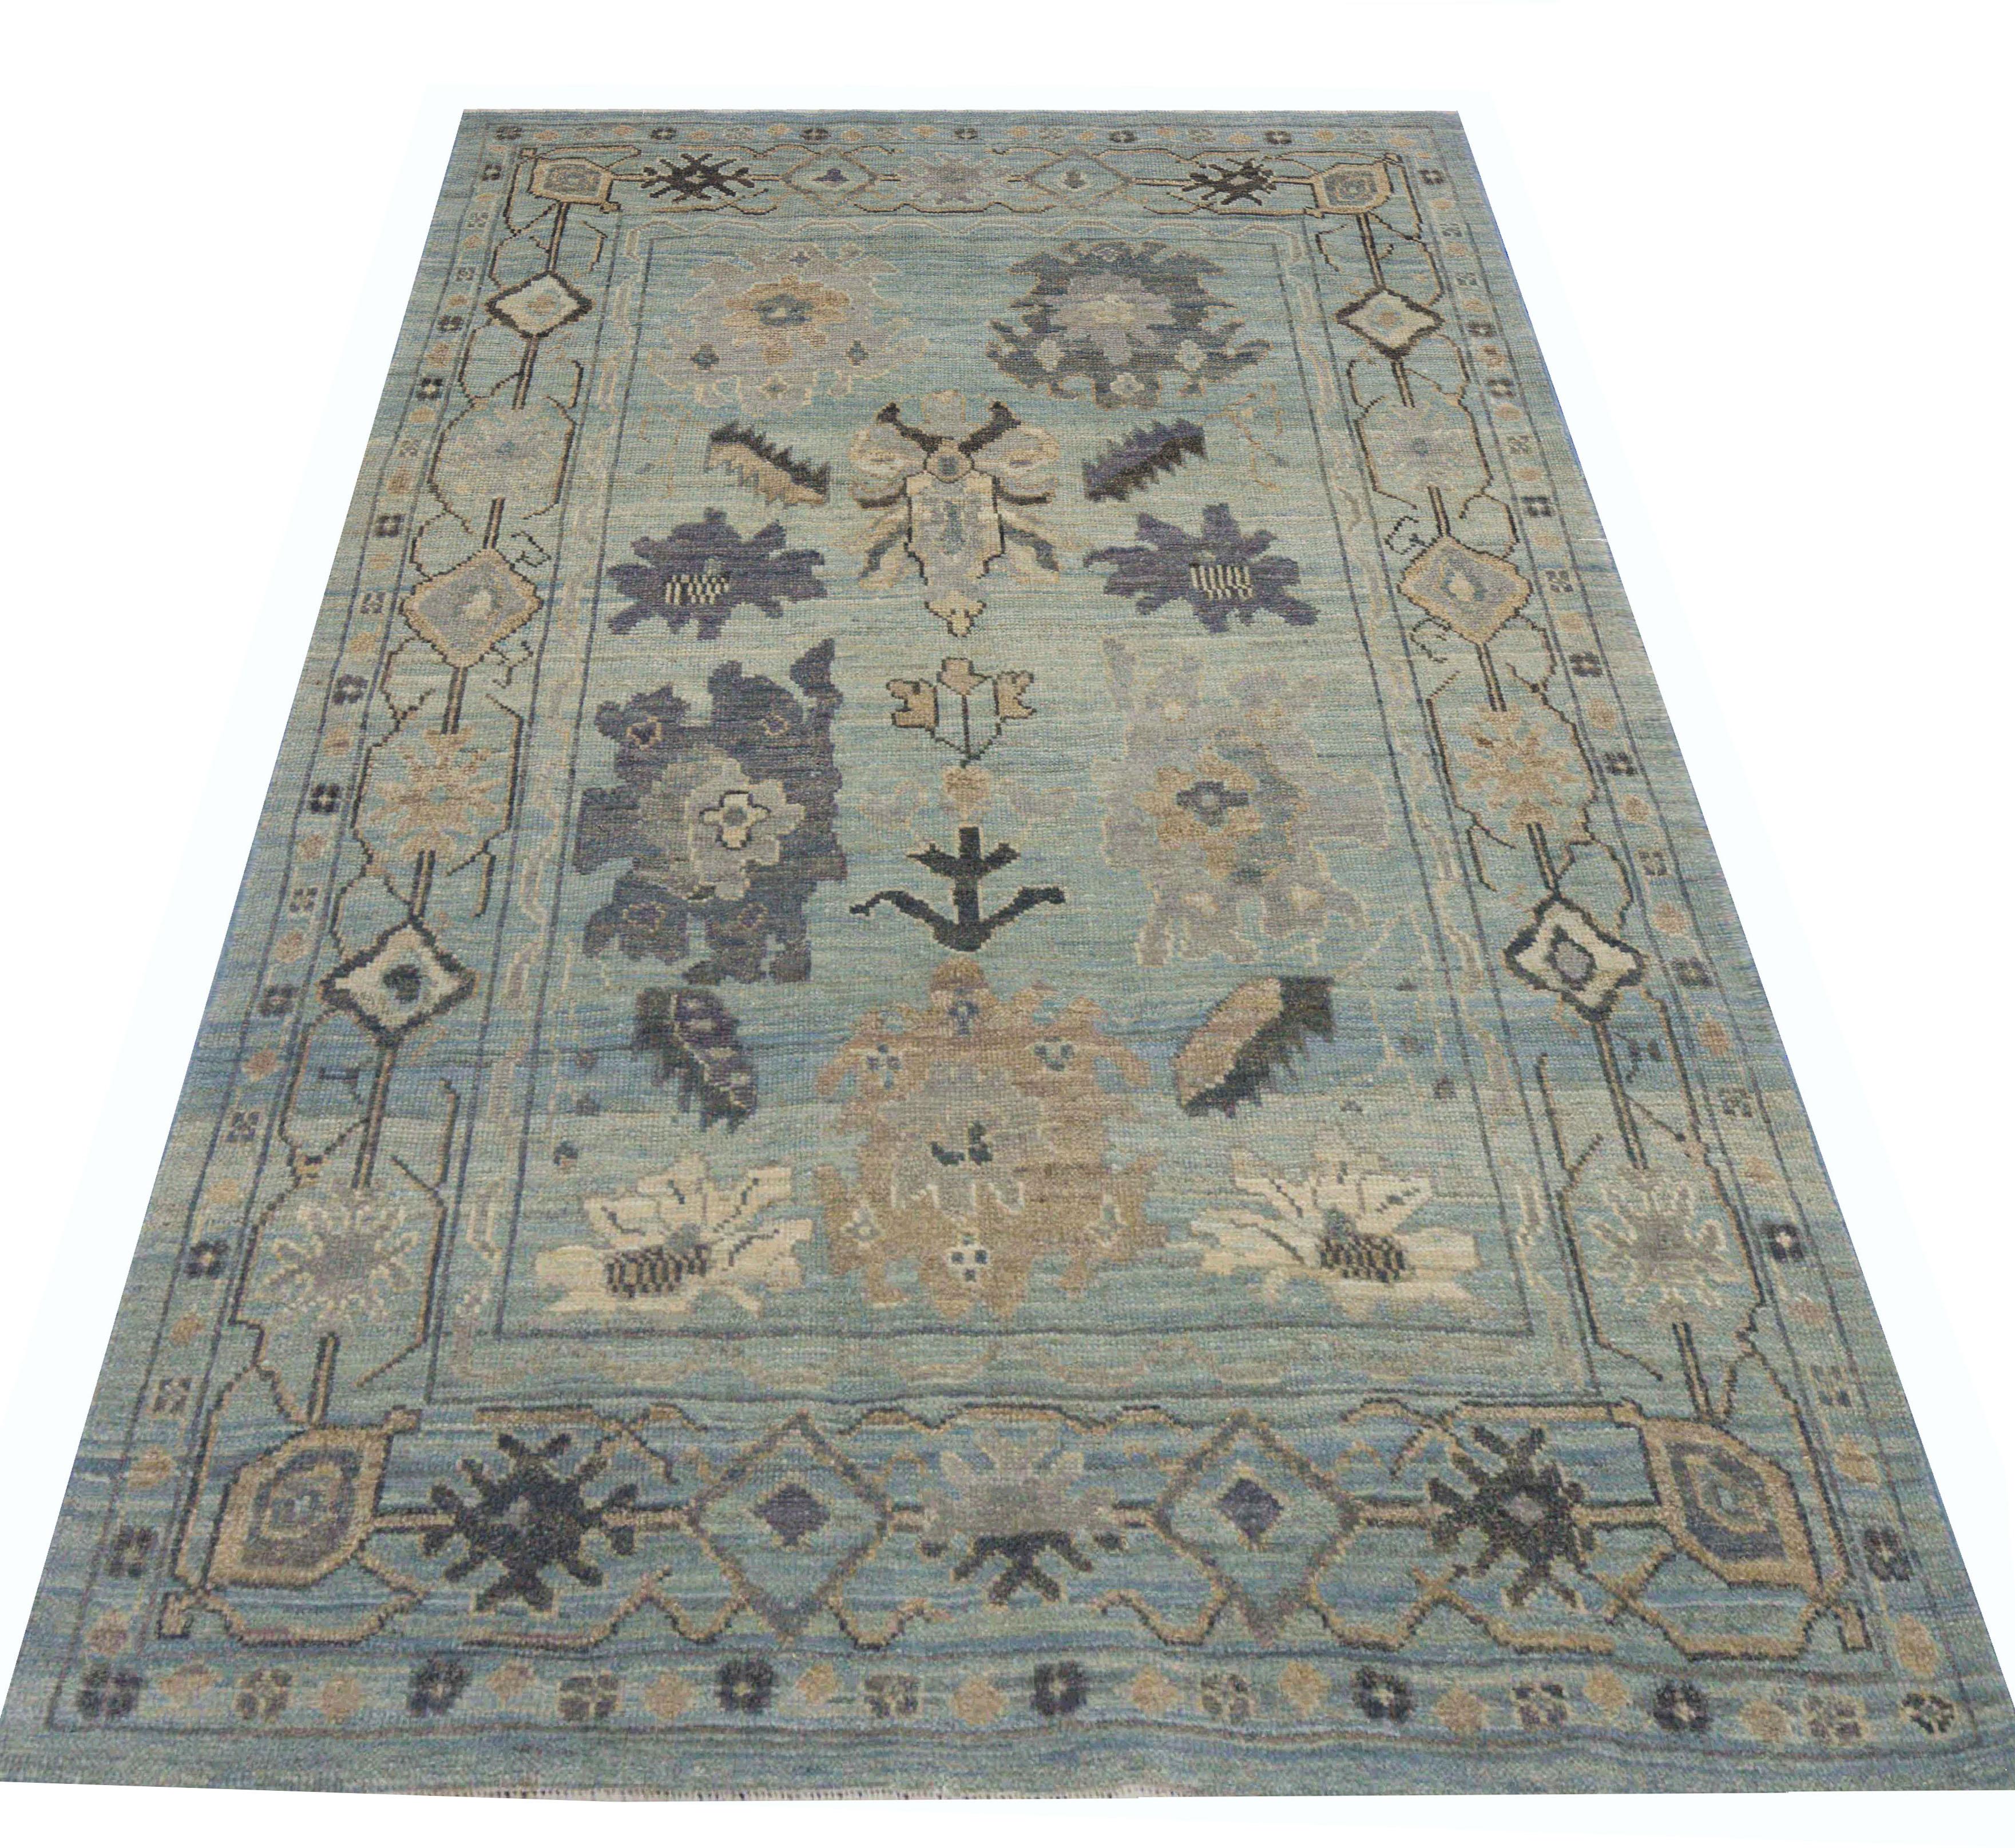  Contemporary Turkish rug made of handwoven sheep’s wool of the finest quality. It’s colored with organic vegetable dyes that are certified safe for humans and pets alike. It features a blend of beige and blue field with flower medallions in gray